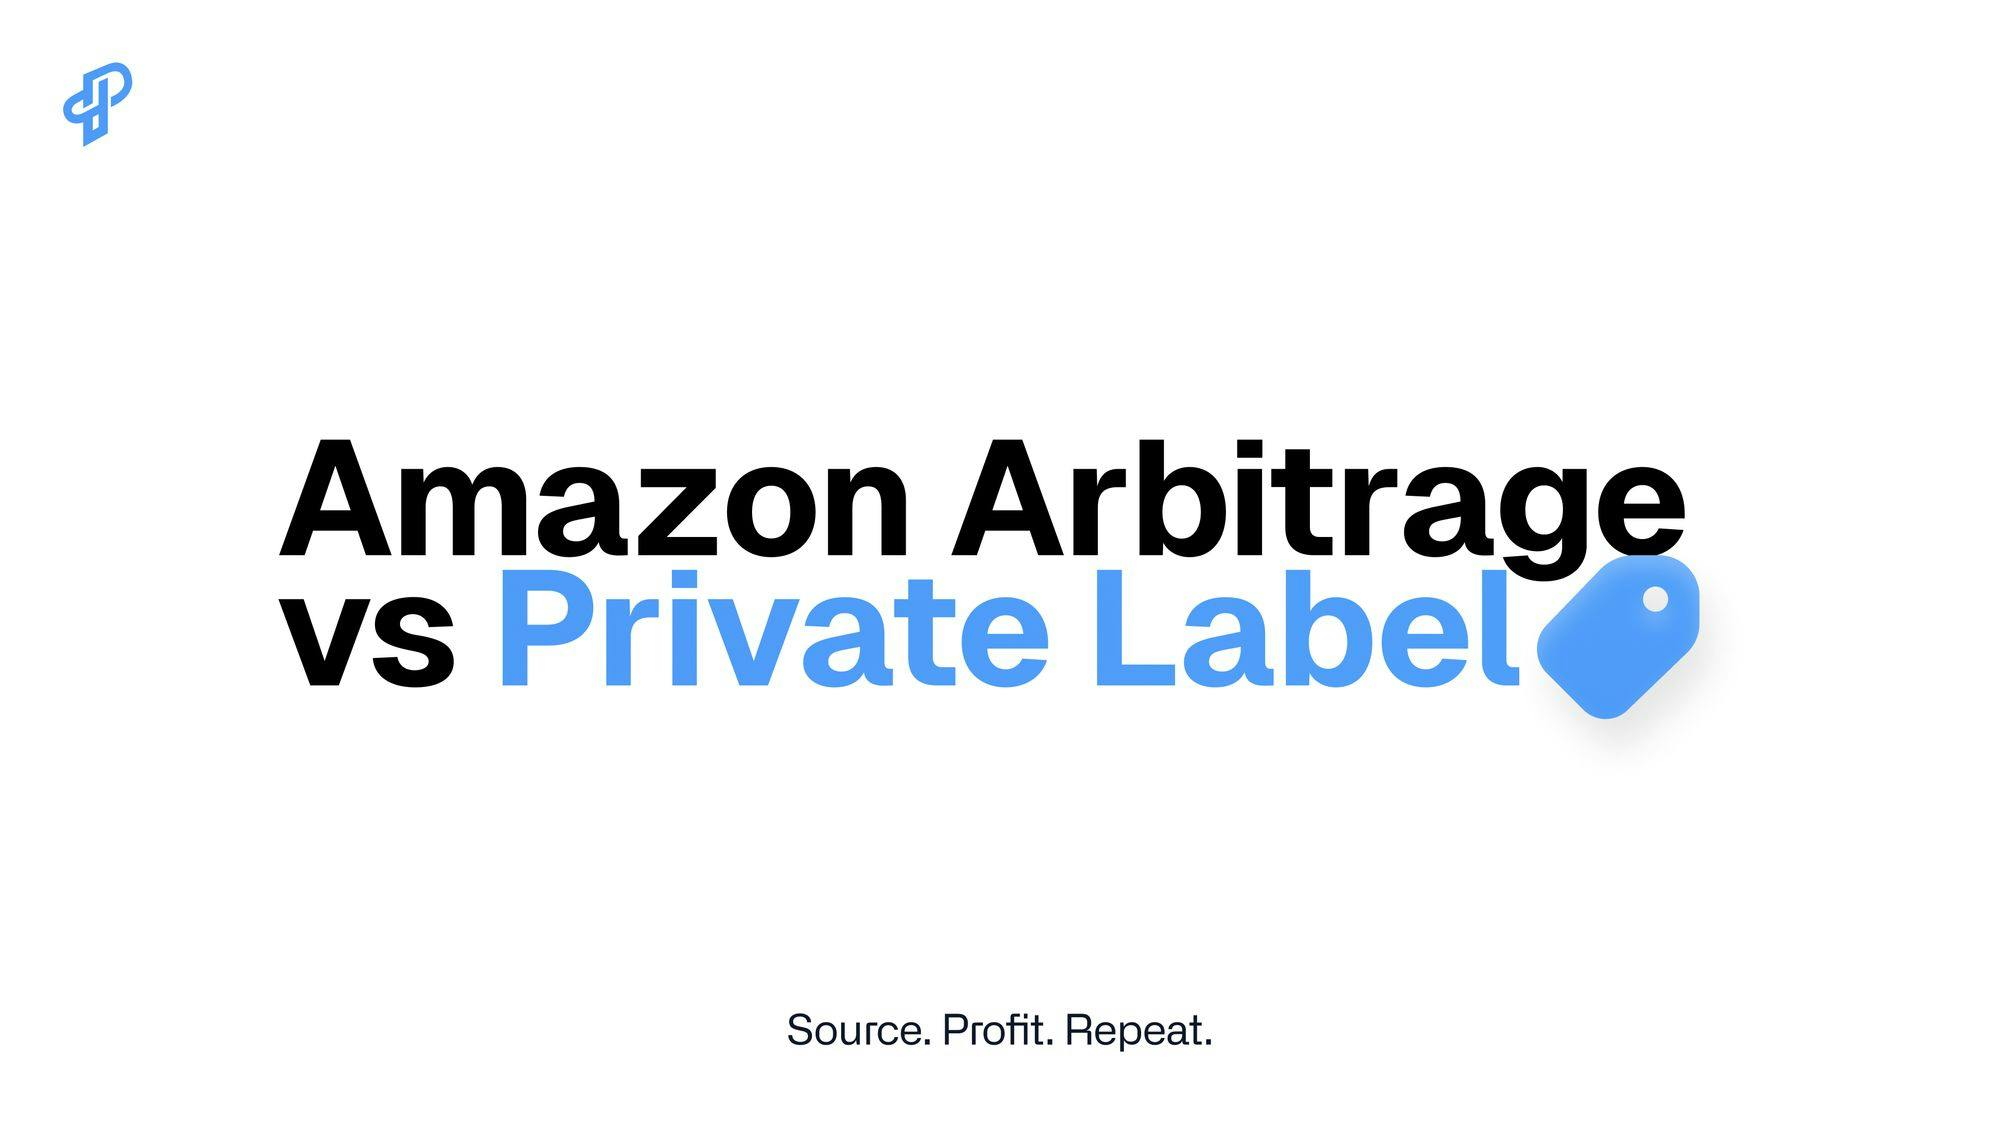 What are the differences between Amazon Arbitrage and Private Label